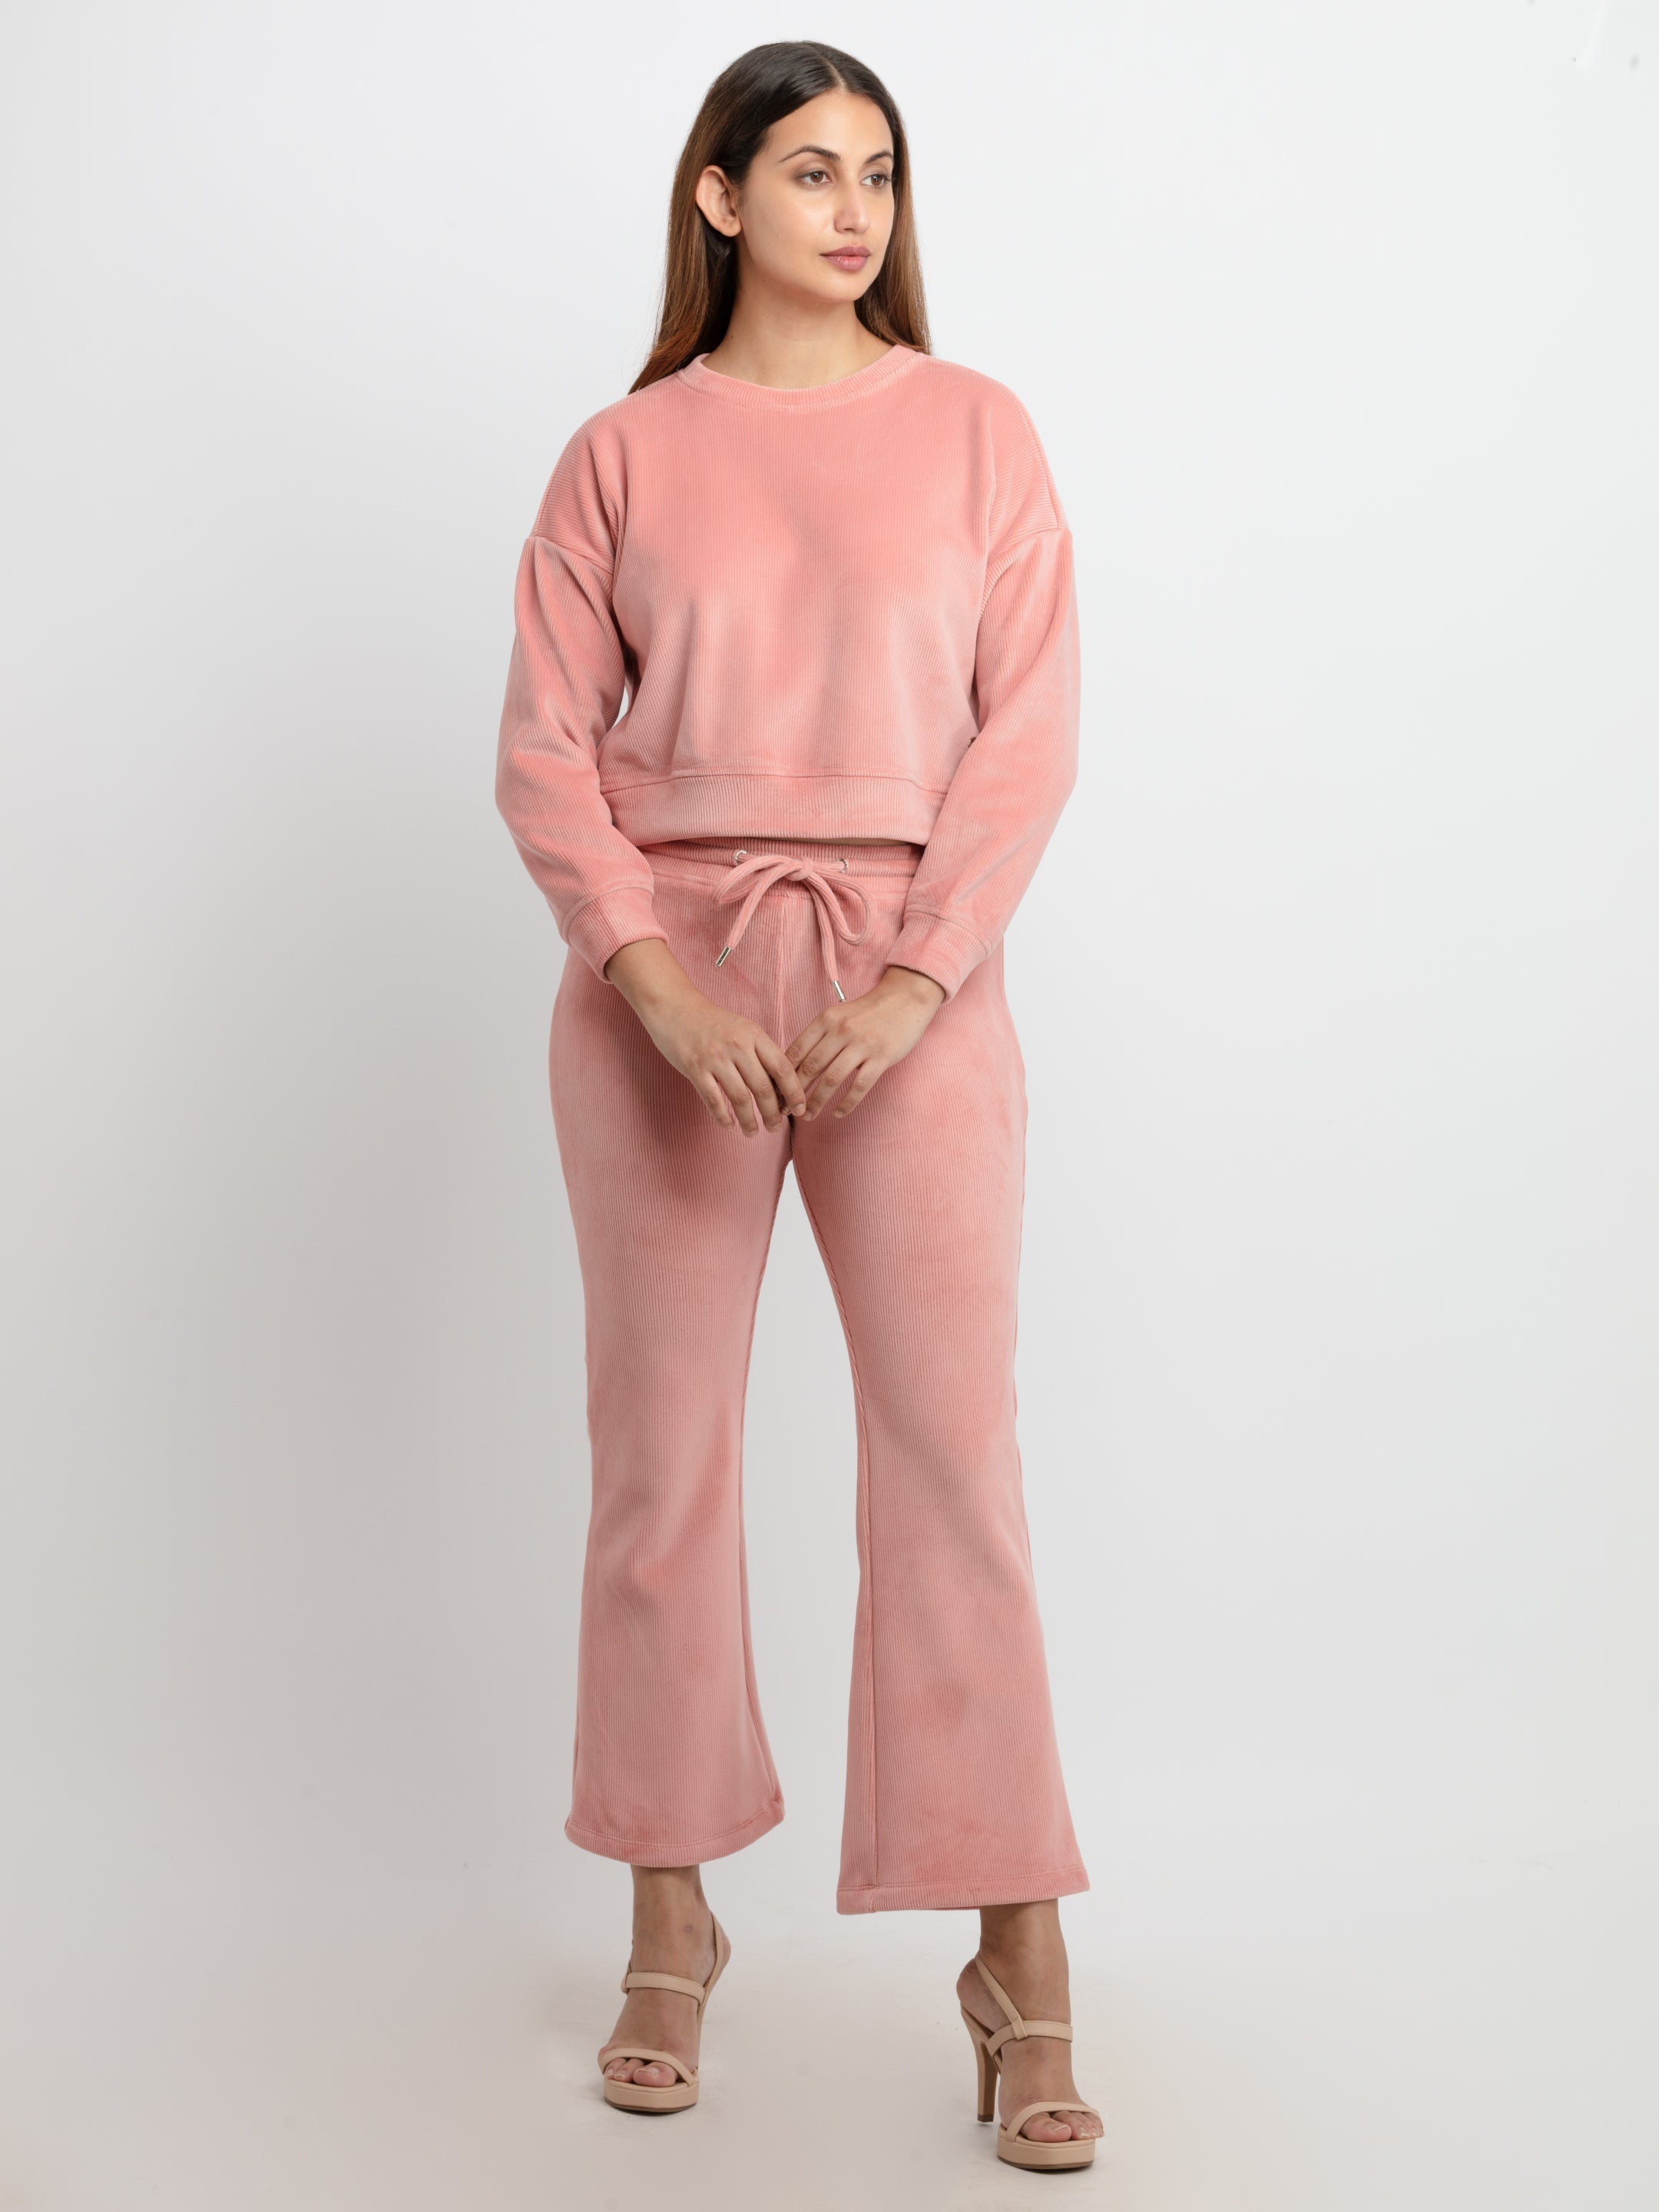 tracksuit for women